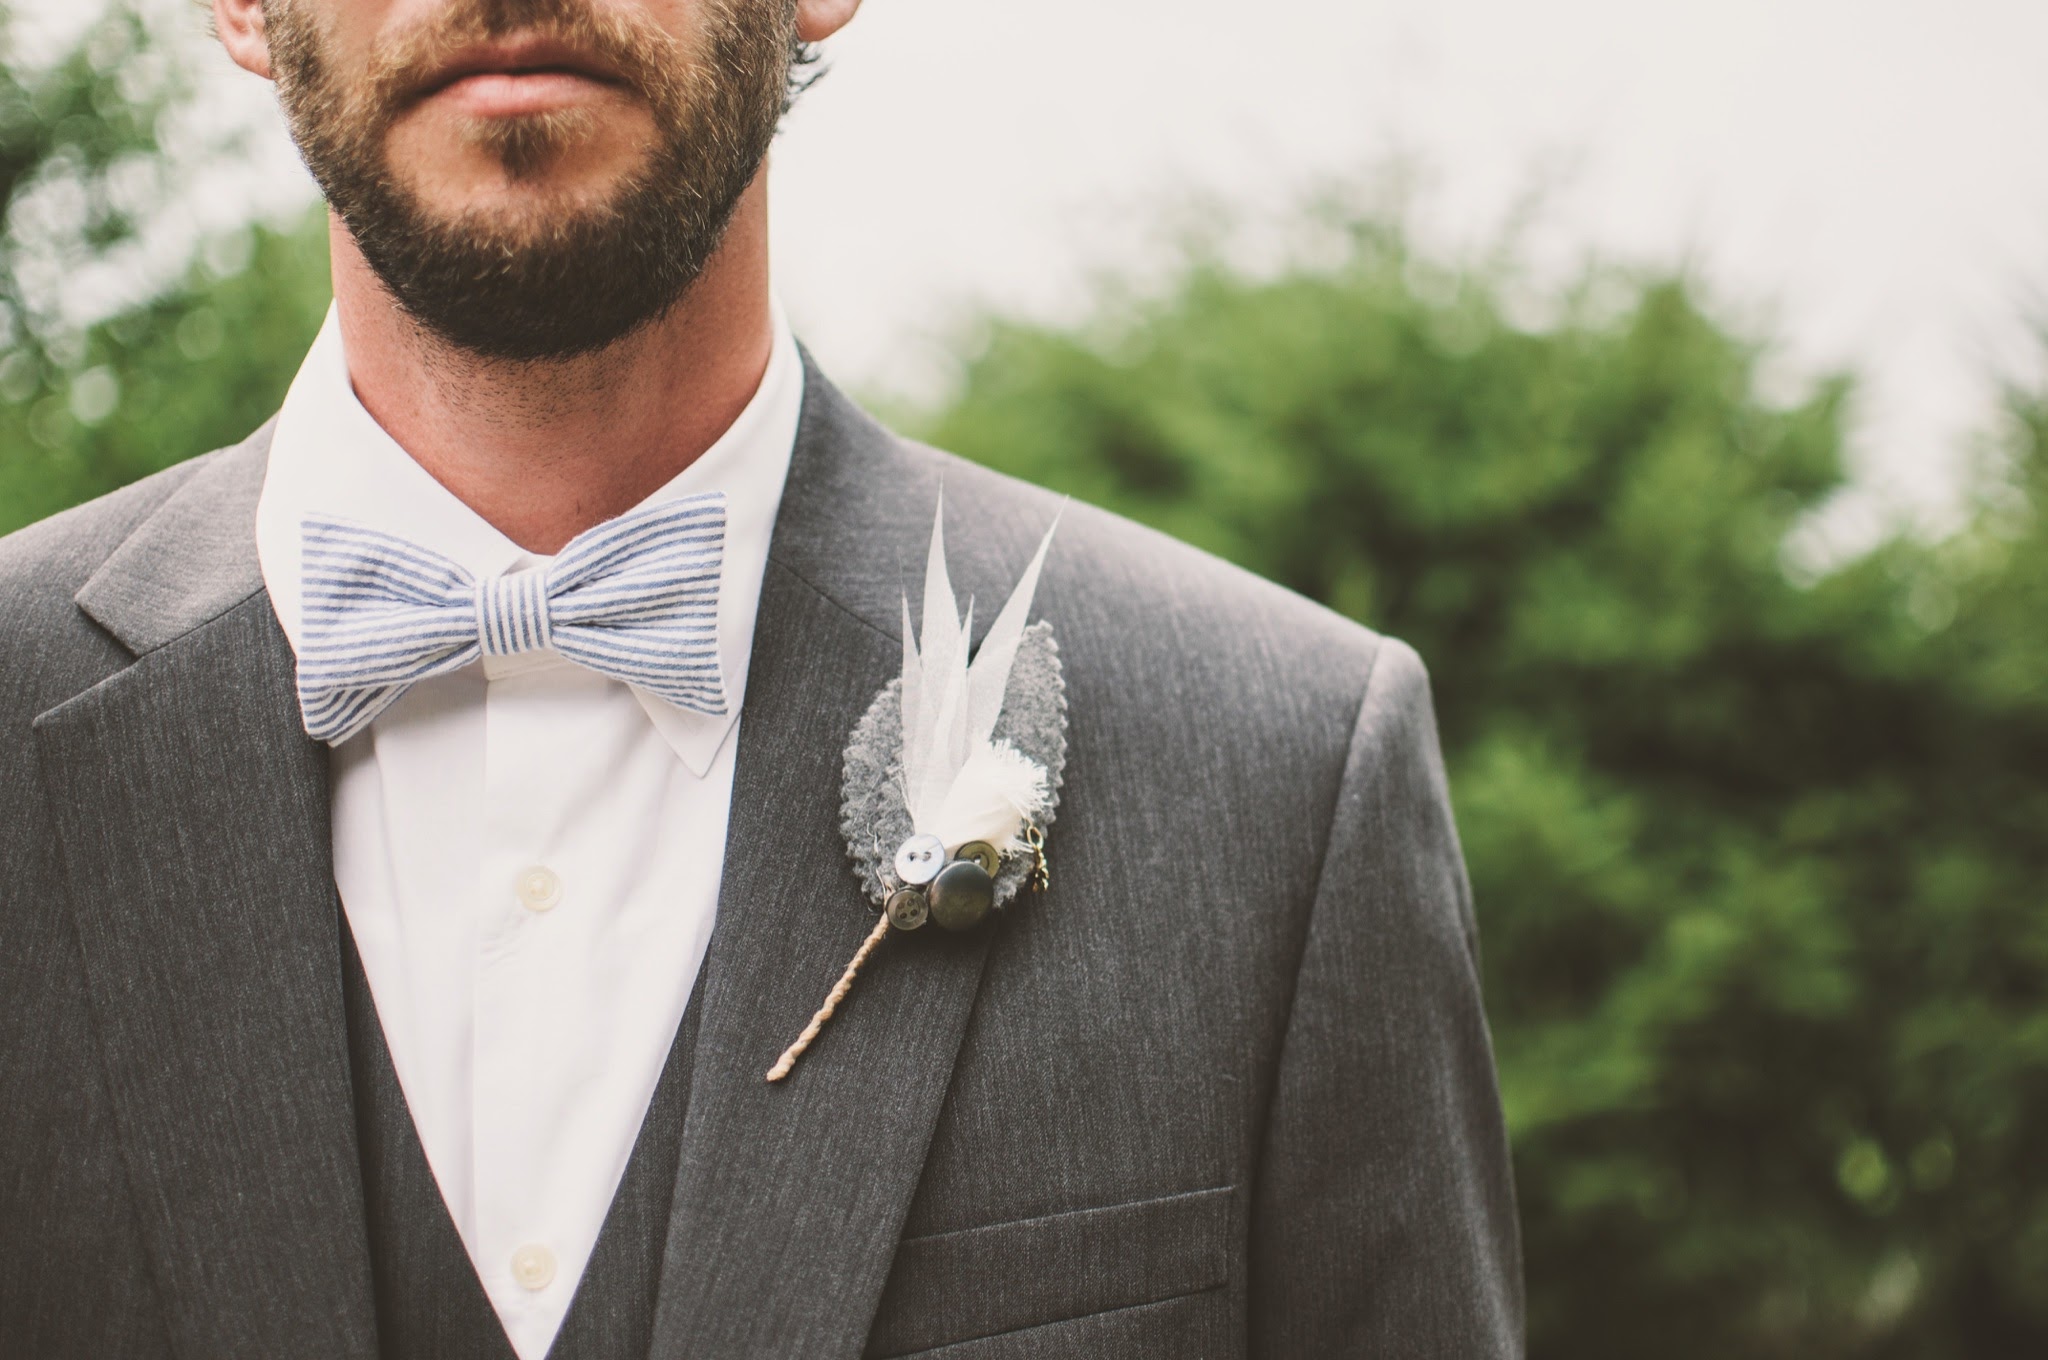 A Checklist For Your Groom-To-Be